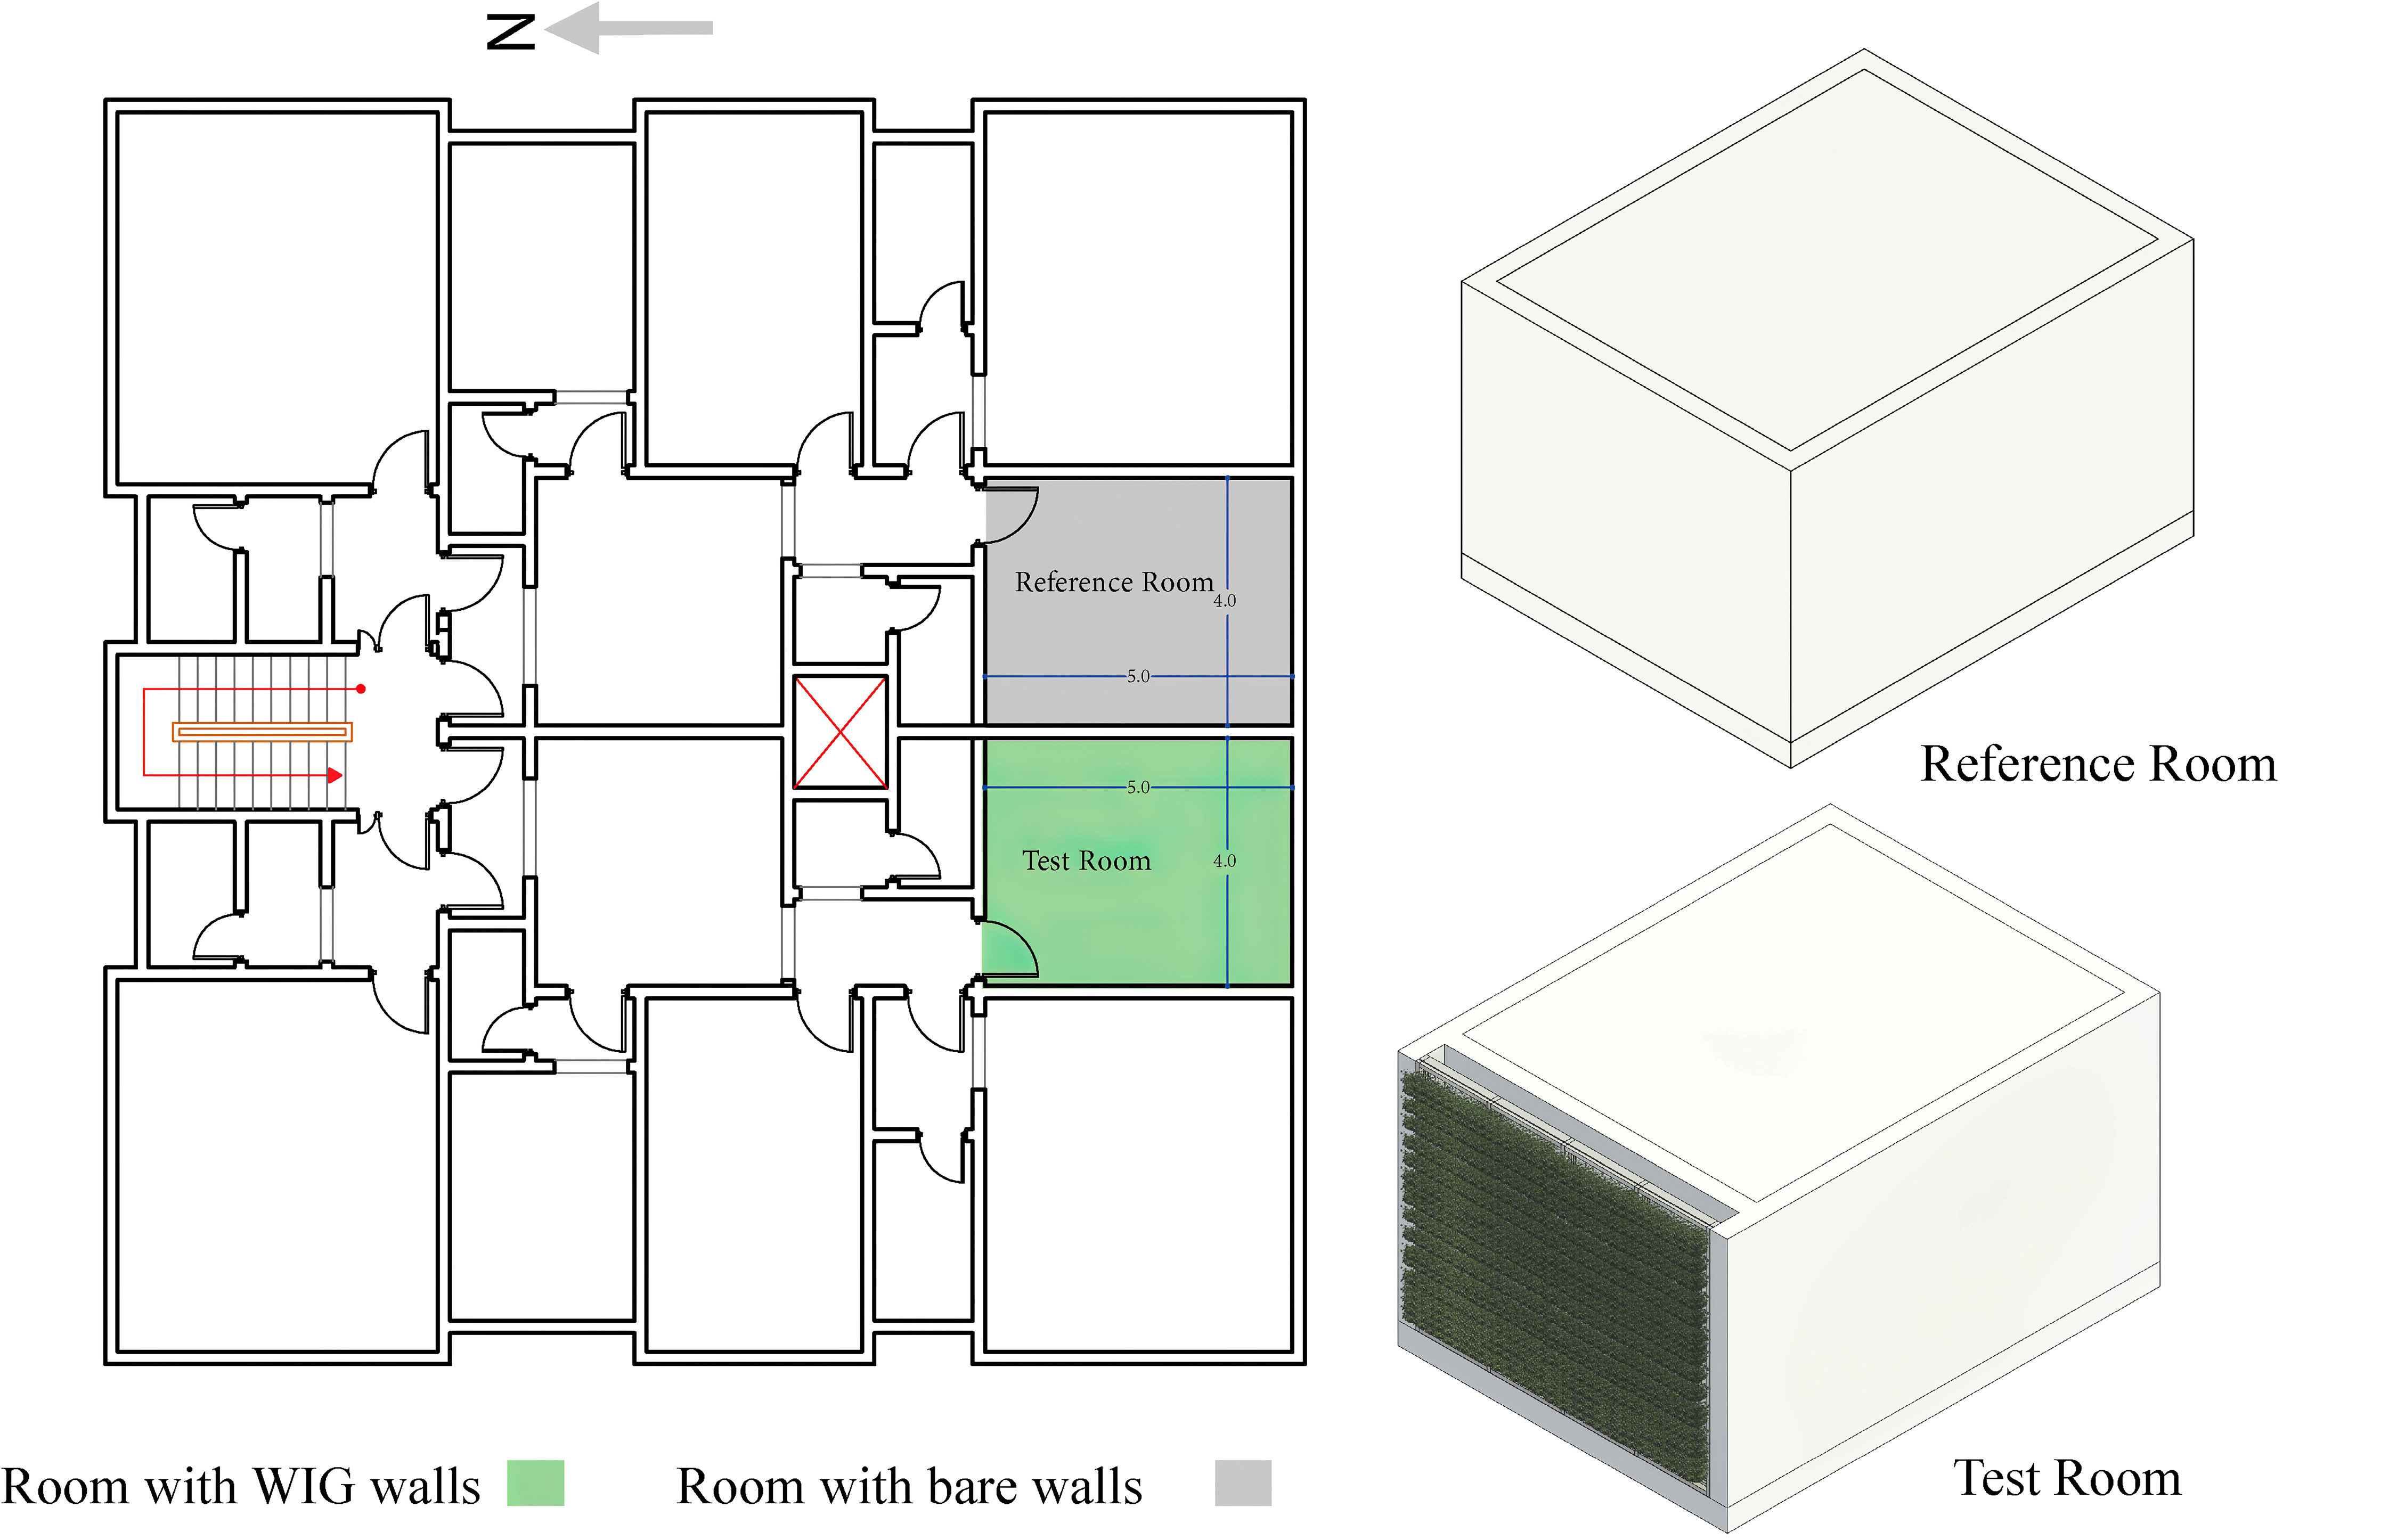 Typical layout of third floor of residential building under study and the test rooms.